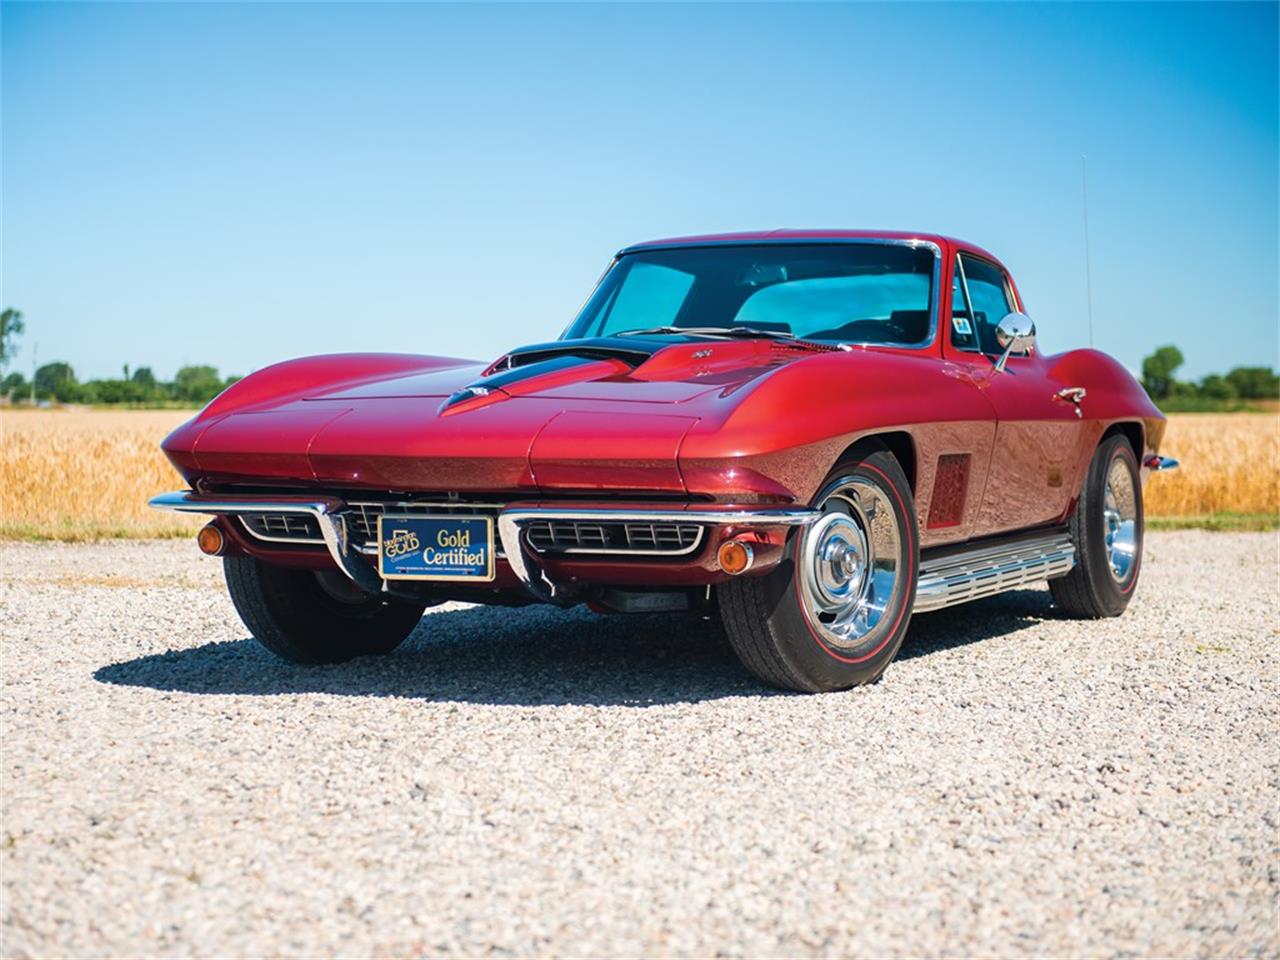 1967 Chevrolet Corvette Sting Ray 427435 Coupe For Sale Classiccars